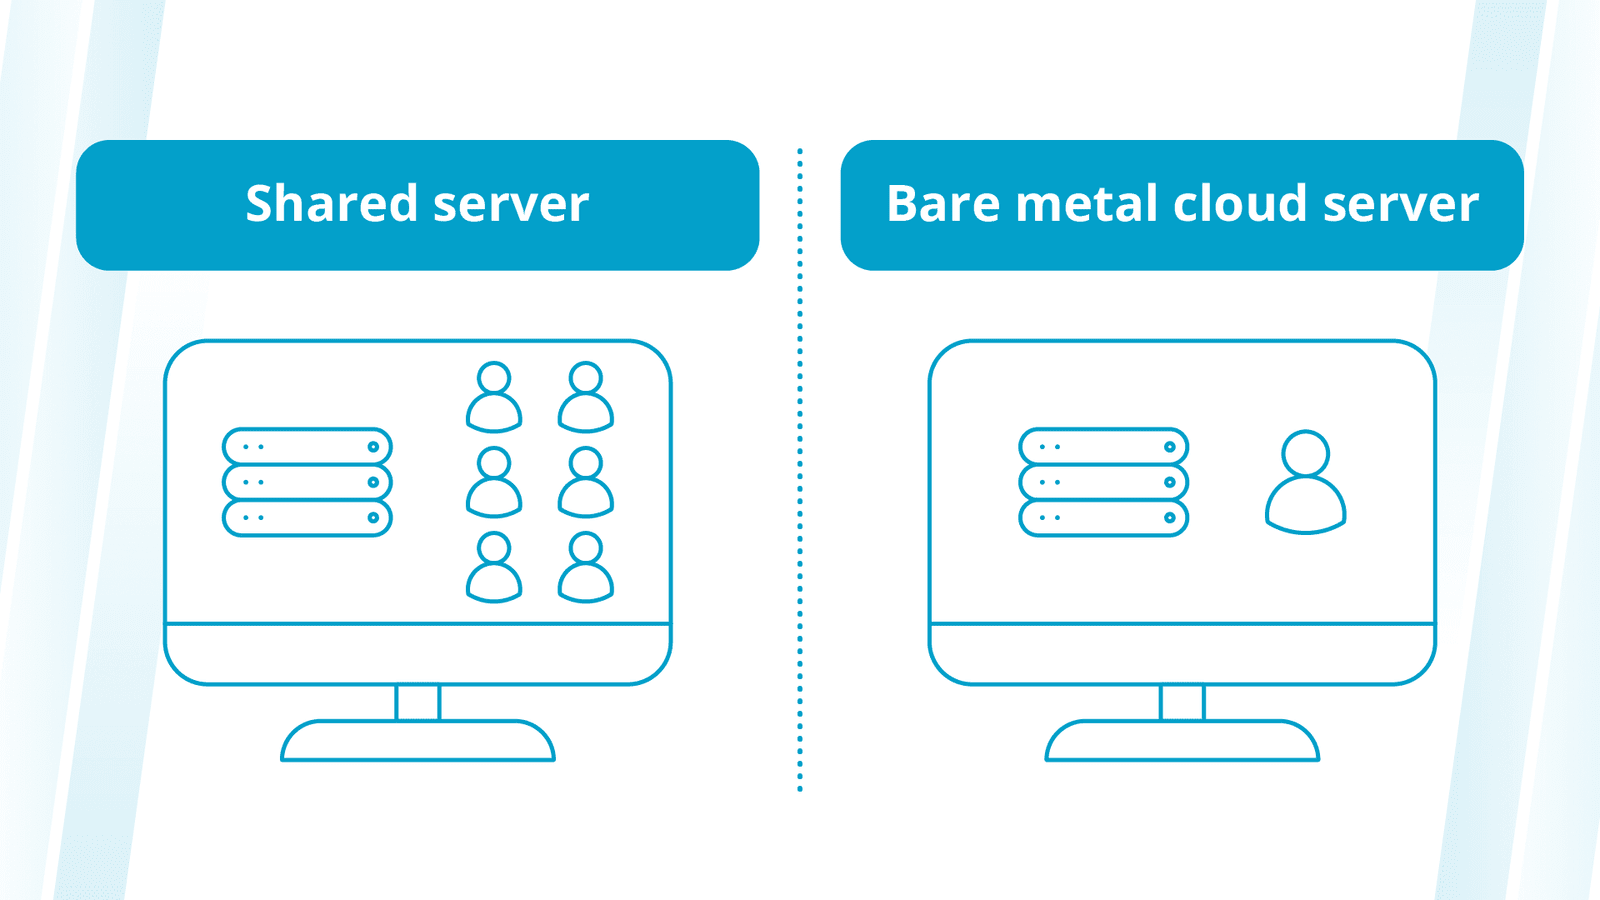 With a bare metal cloud server, you don’t share resources with other tenants.